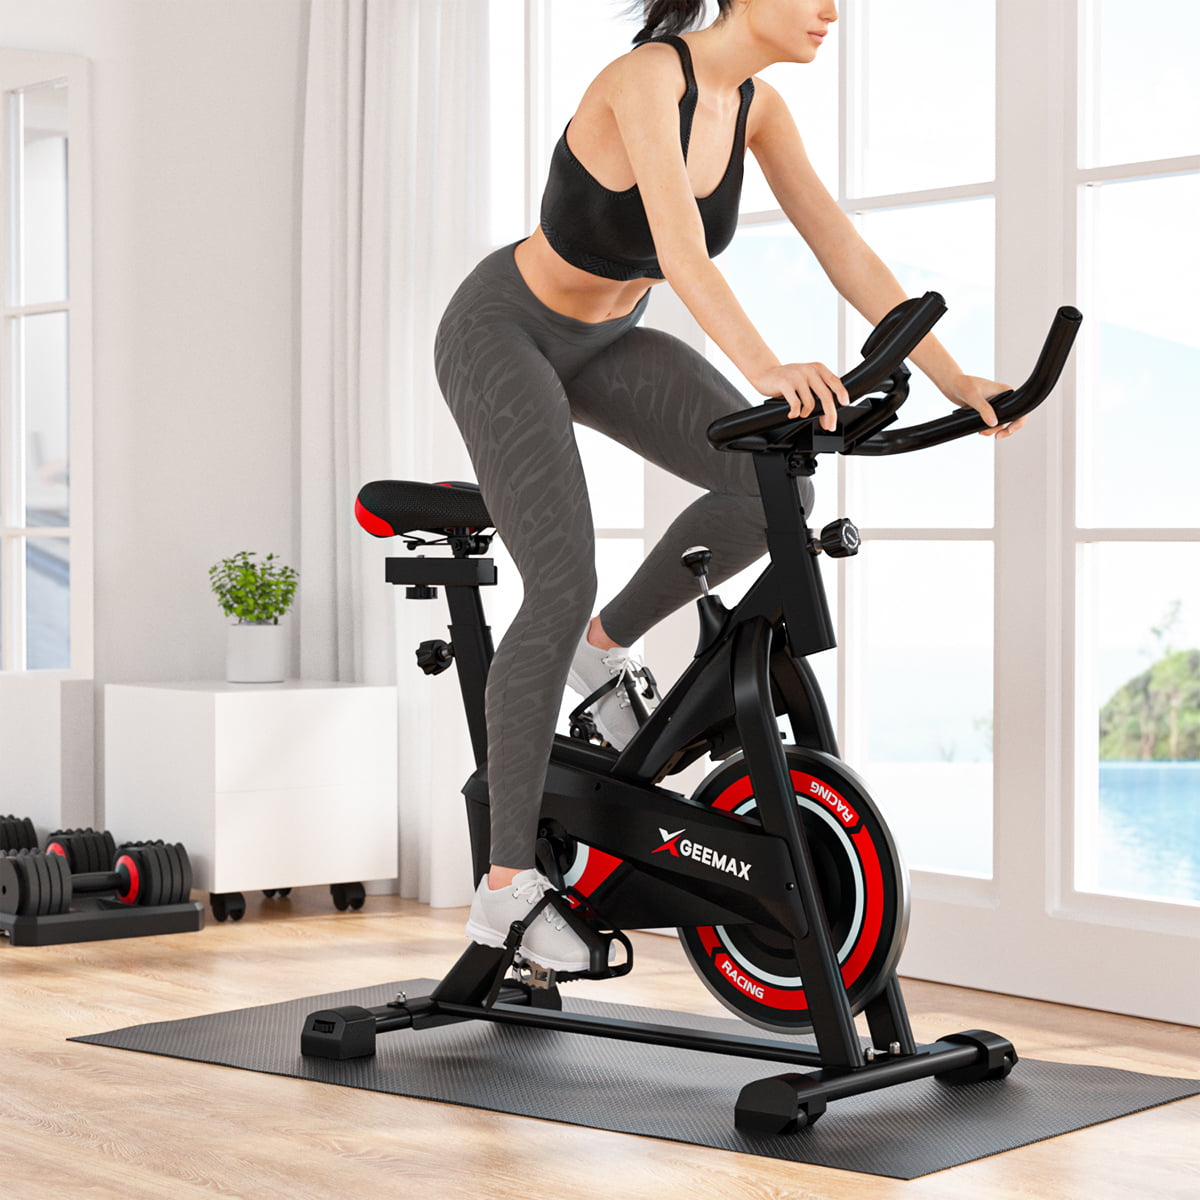 Spin Bike Aerobic Exercise Indoor Home Fitness Training Gym Spinning Led Monitor 